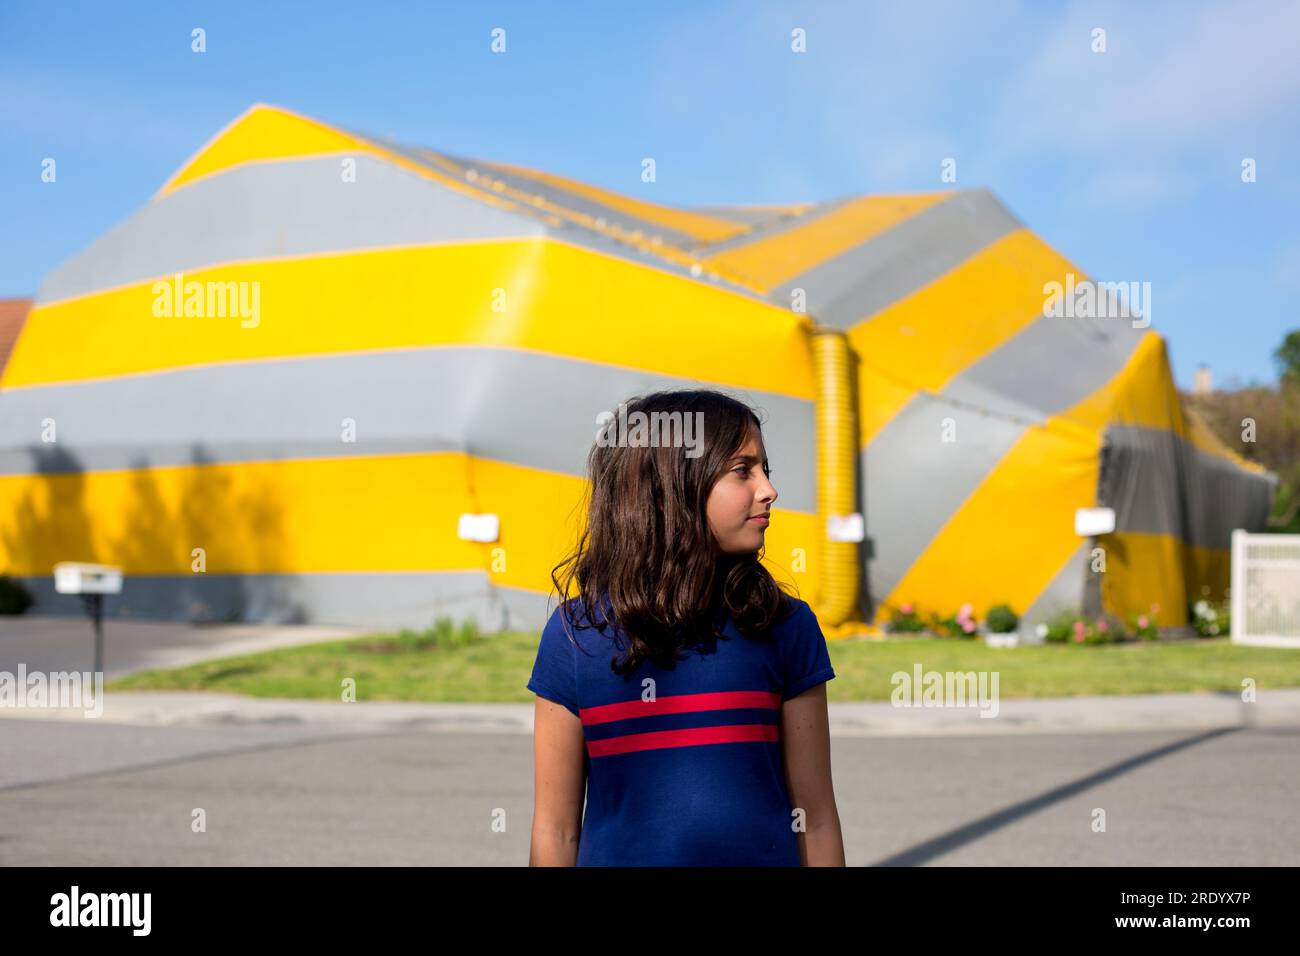 Tented house in background, girl stands outside looking to her left. Stock Photo